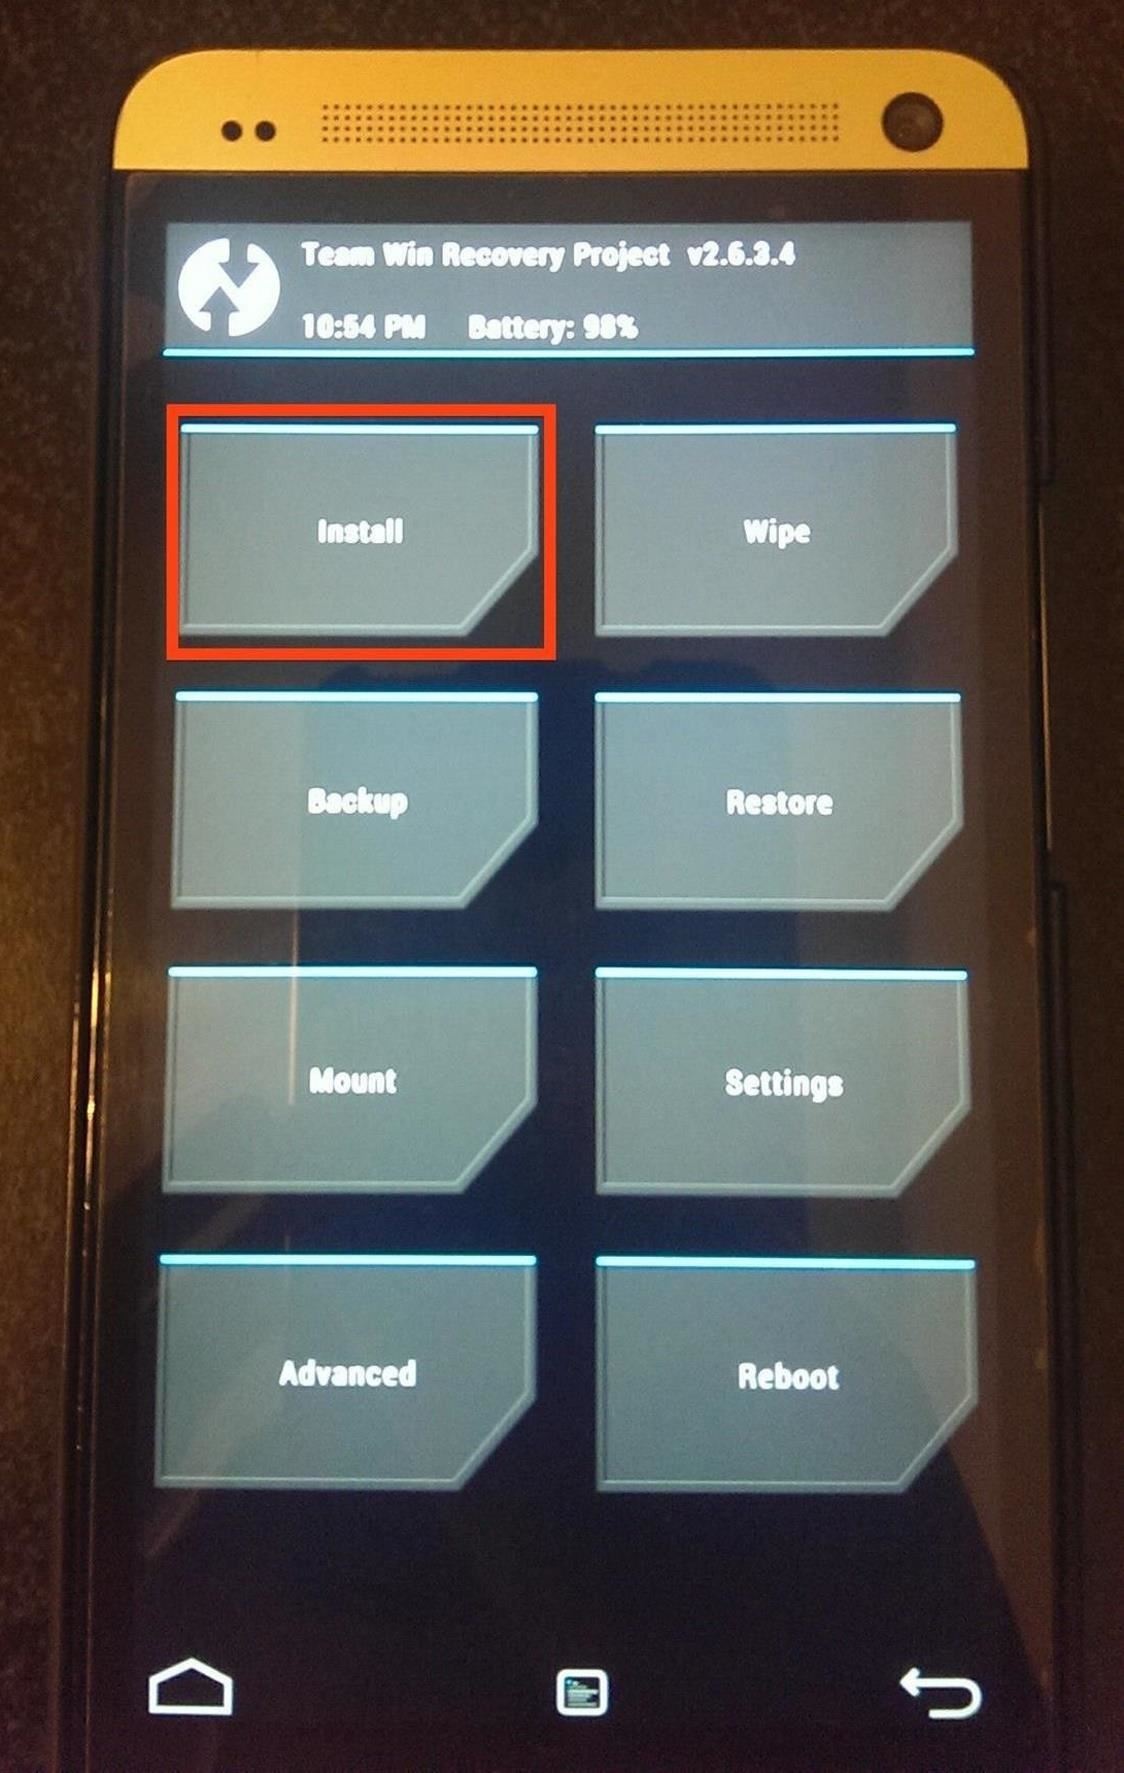 How to Unlock the Bootloader & Root Your HTC One Running Android 4.4.2 KitKat